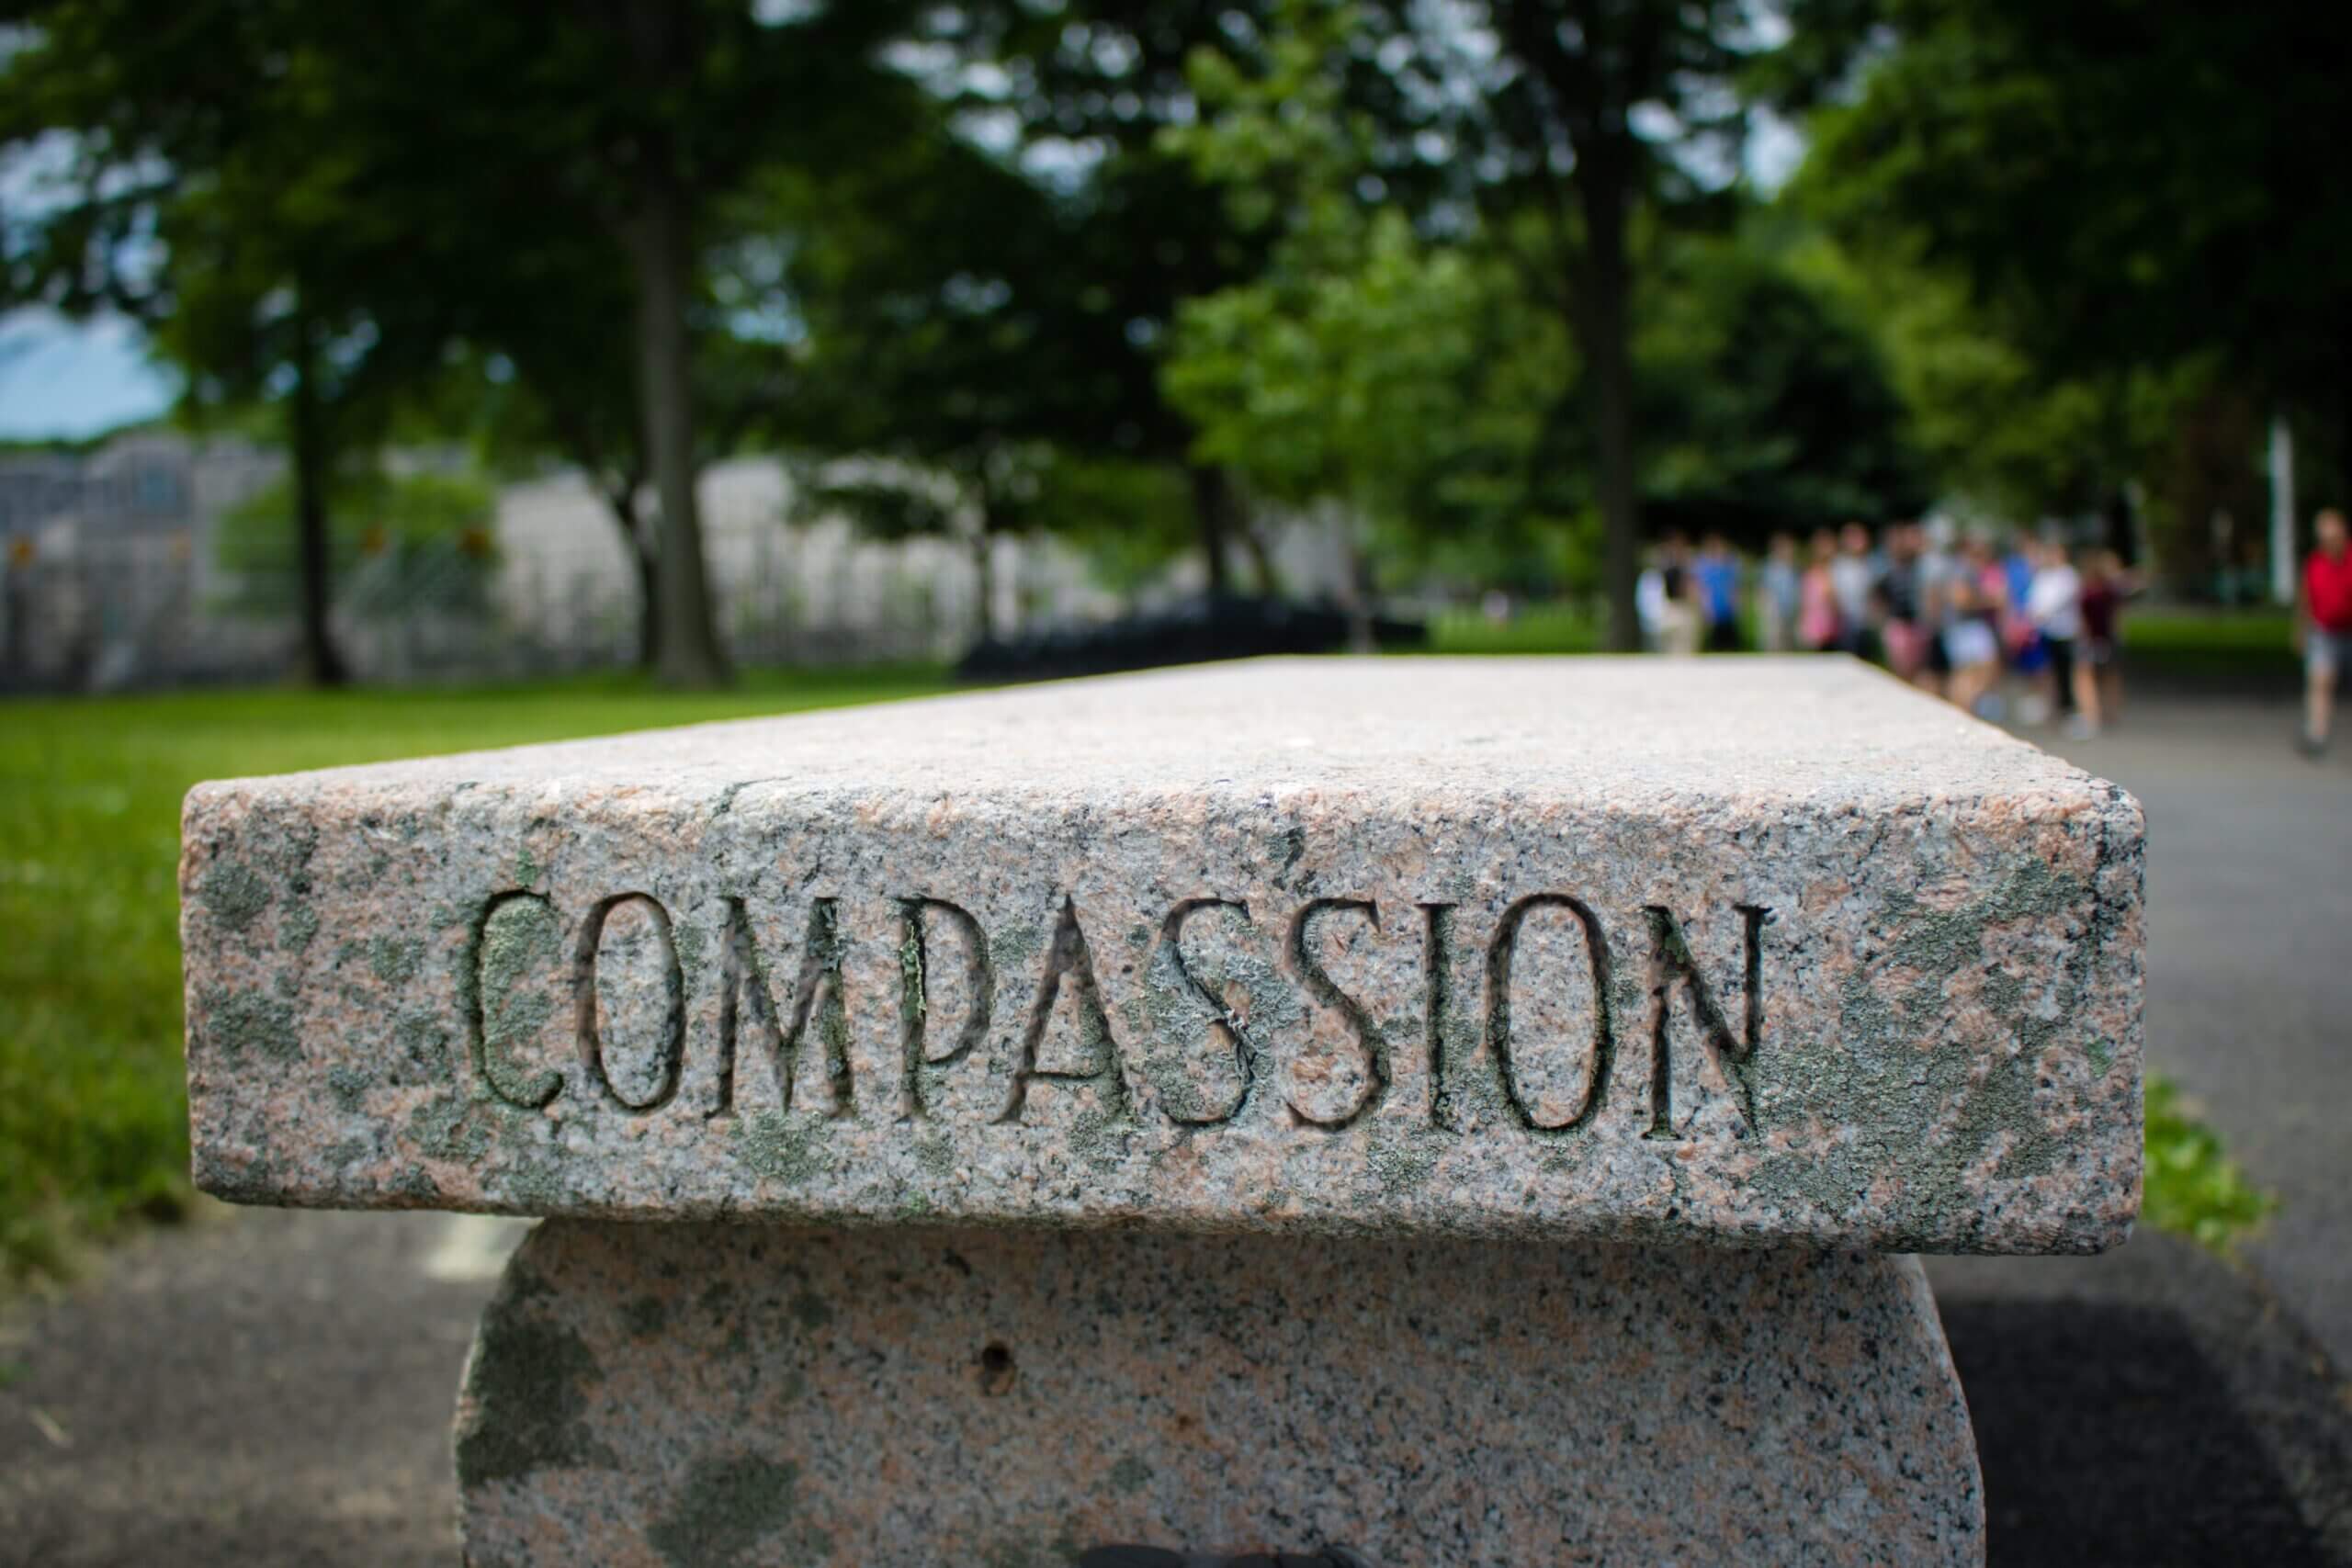 Lessons Learned as a Human Being and Small Business Owner: Equanimity and Compassion are Key